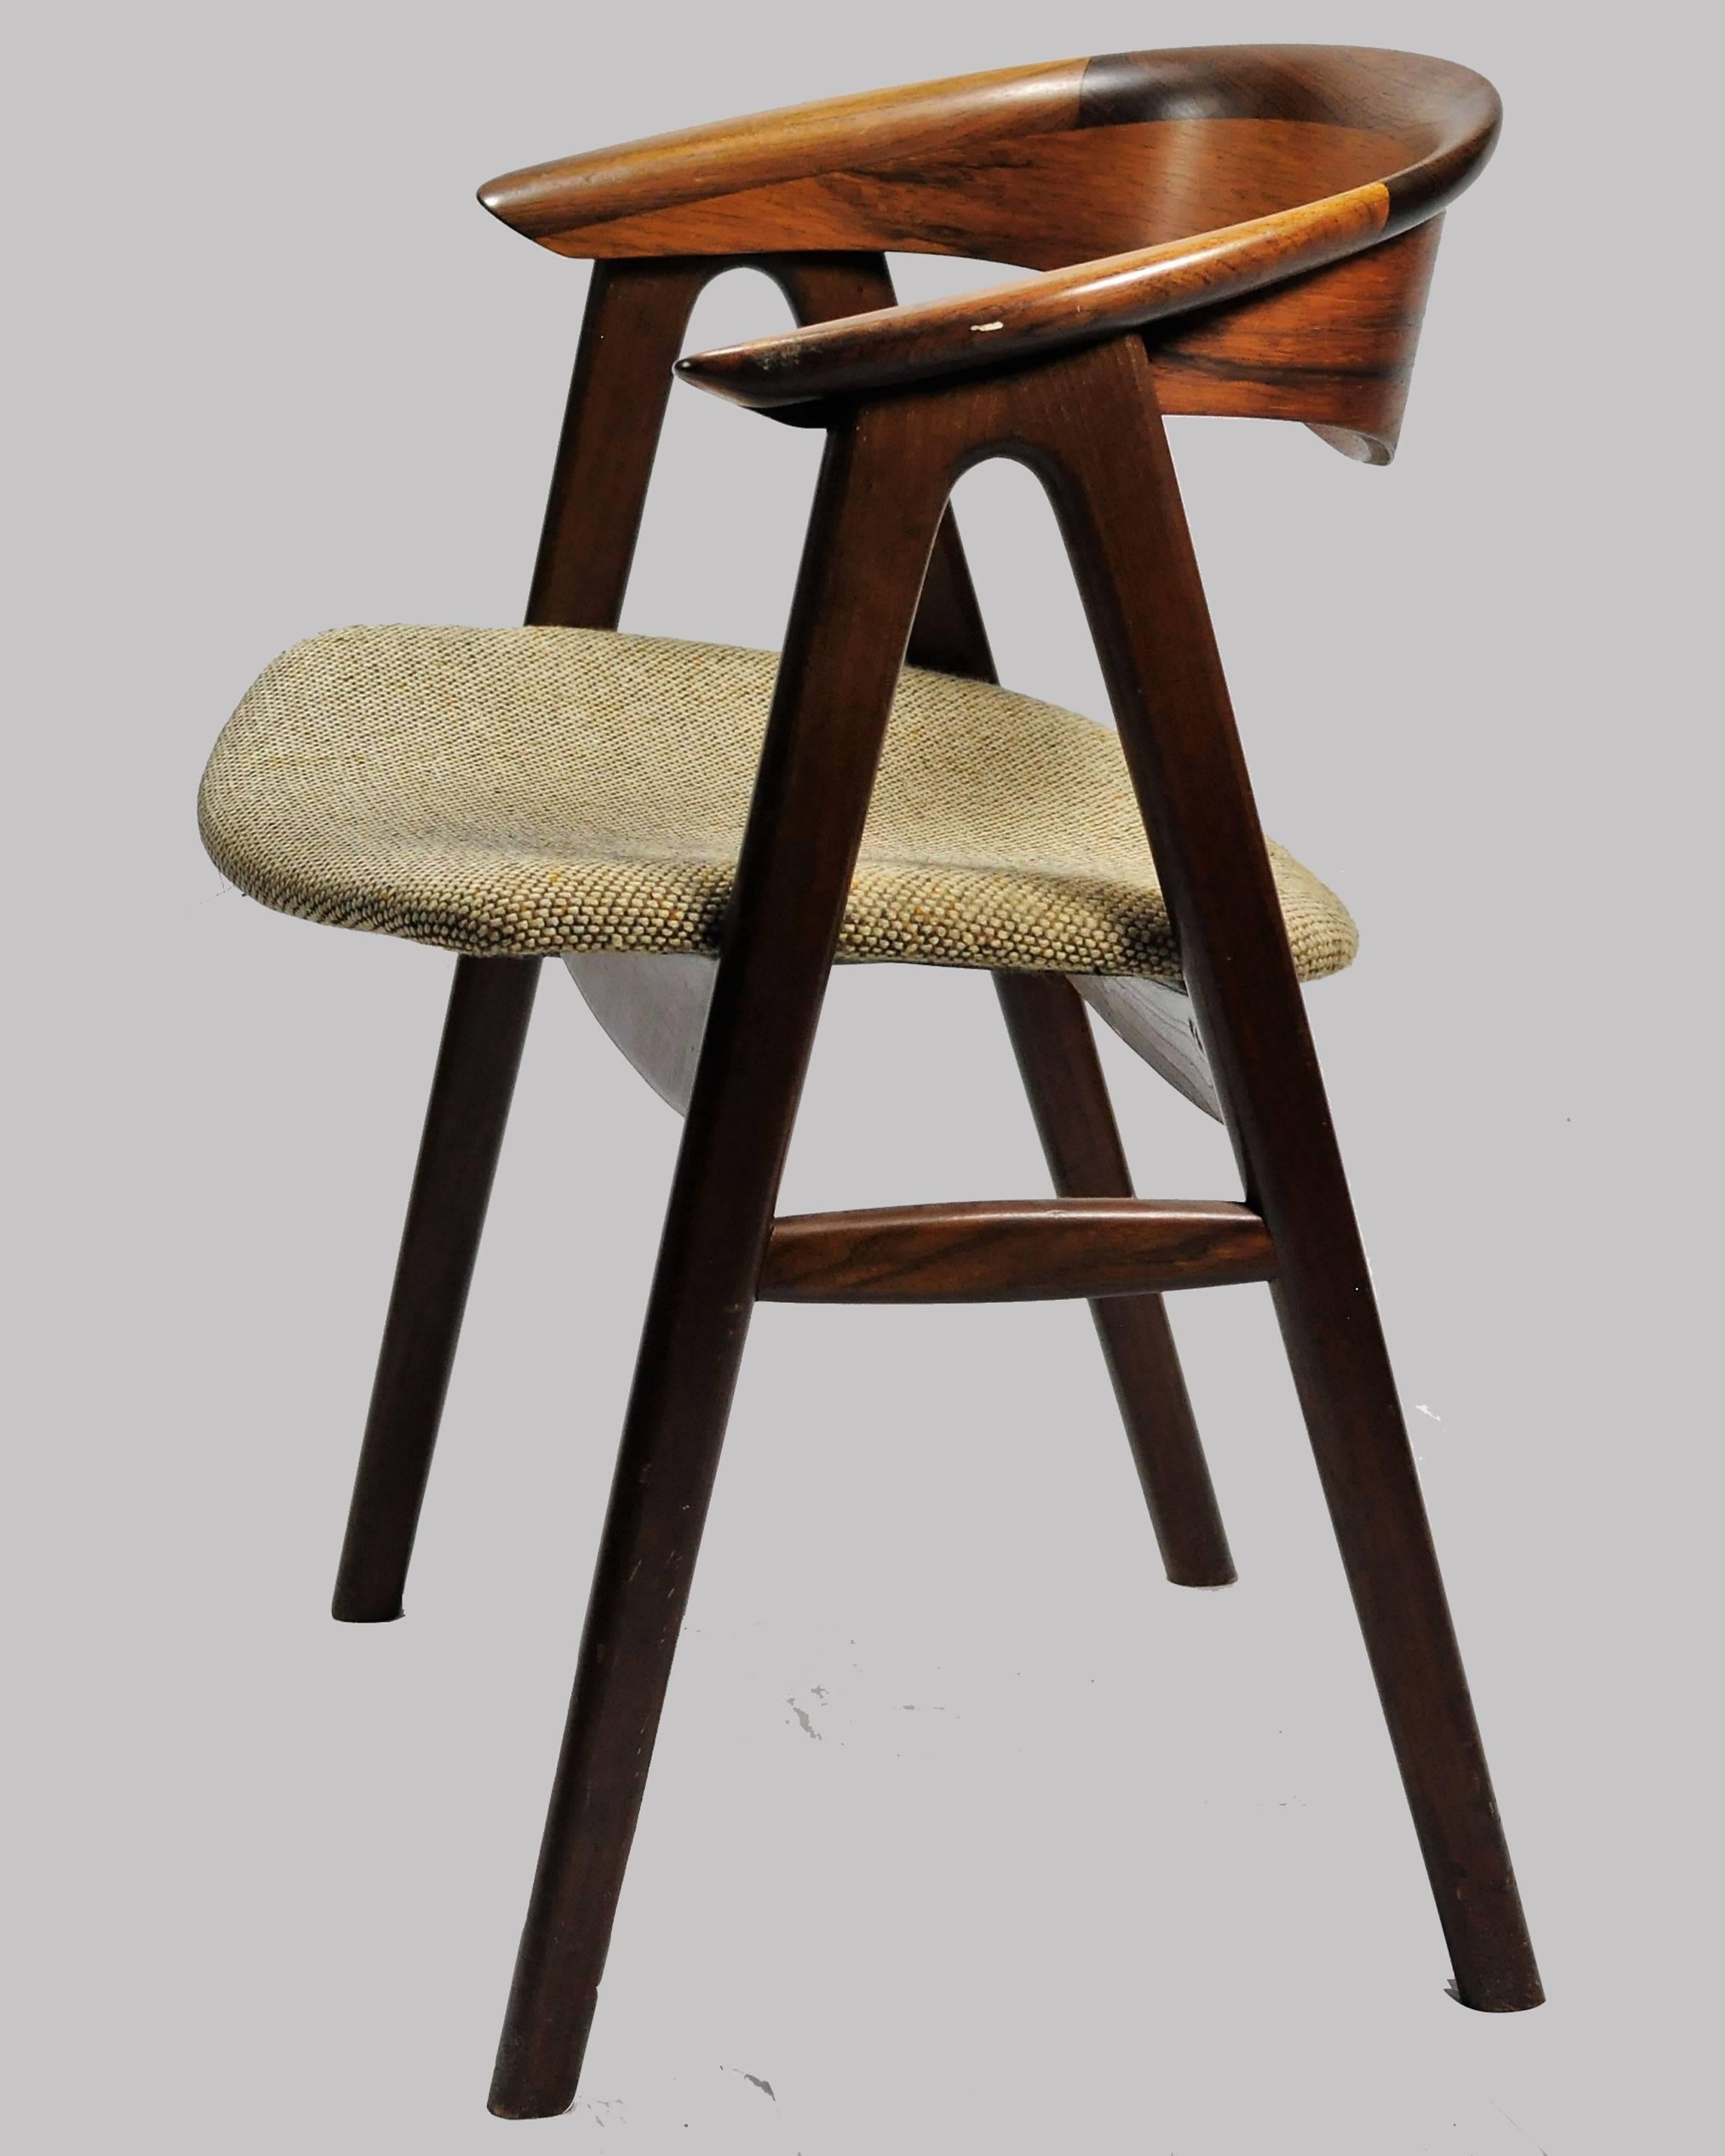 Rare set of six dining rosewood chairs from the mid-1950s designed by Erik Kirkegaard and produced by Høng Møbelfabrik.

The chairs feature a solid yet elegant design with the curved back- and armrest and the straight lined typical Erik Kirkegaard